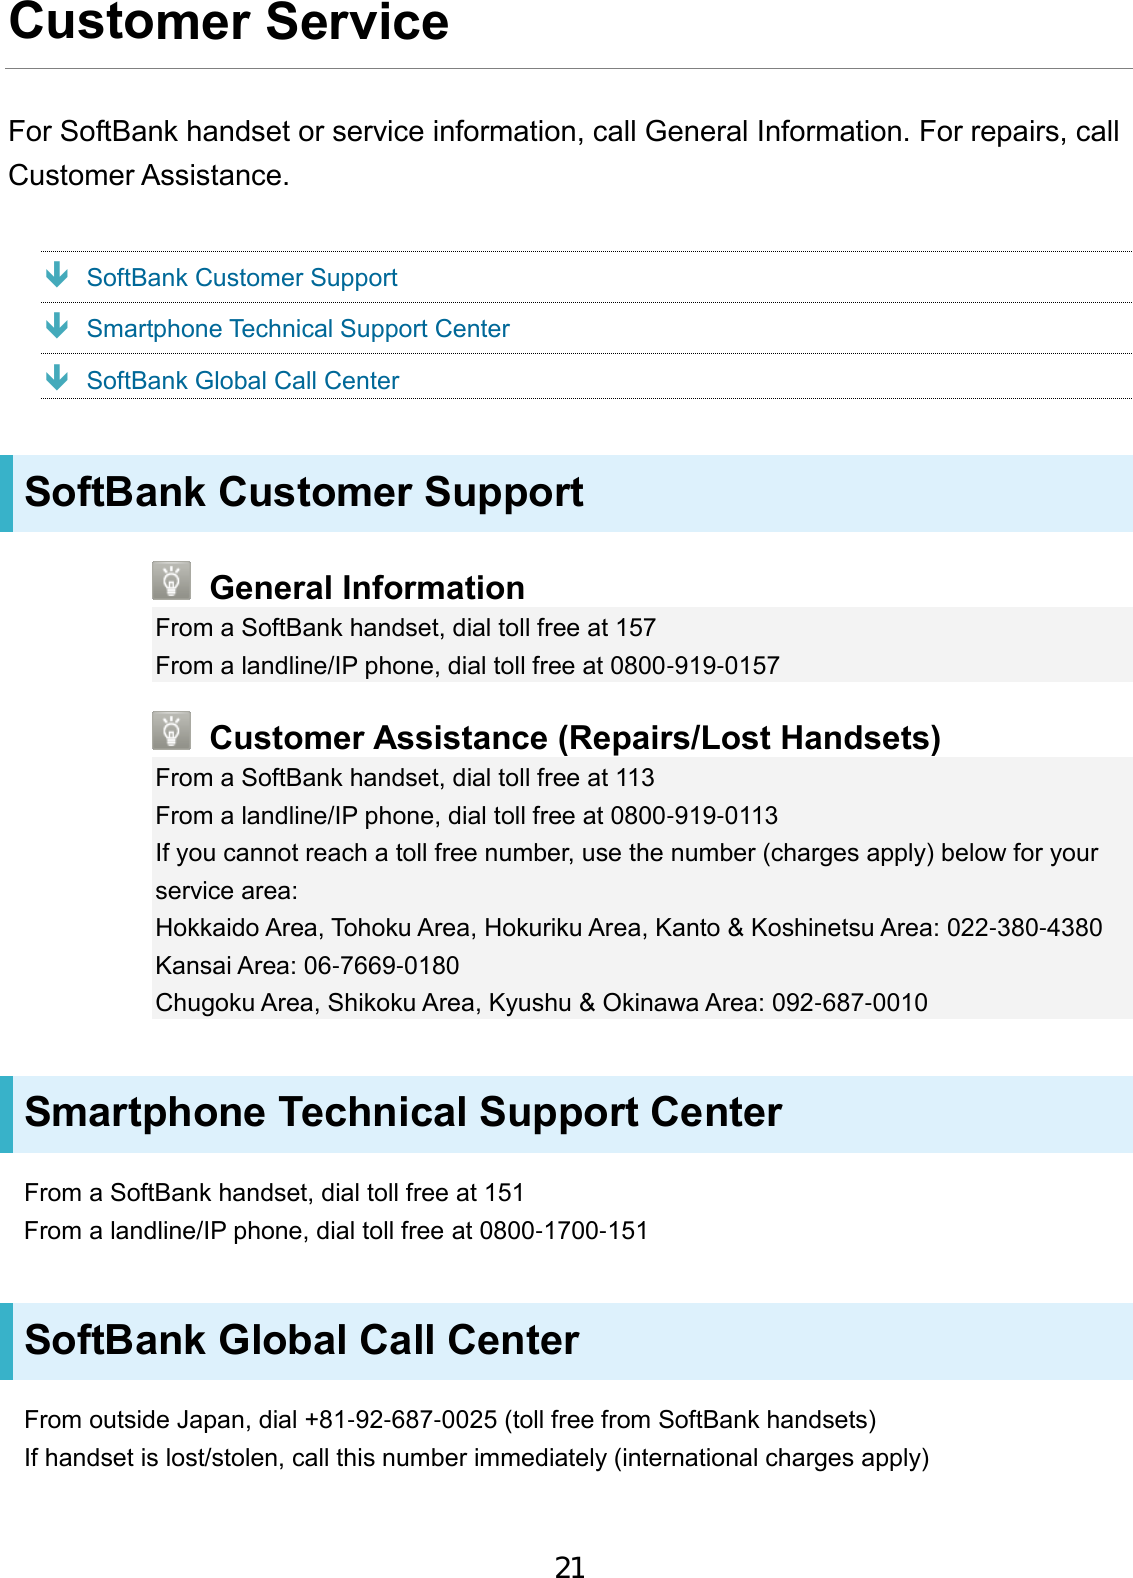 Customer Service For SoftBank handset or service information, call General Information. For repairs, call Customer Assistance.  SoftBank Customer Support  Smartphone Technical Support Center  SoftBank Global Call Center SoftBank Customer Support General Information From a SoftBank handset, dial toll free at 157 From a landline/IP phone, dial toll free at 0800-919-0157 Customer Assistance (Repairs/Lost Handsets) From a SoftBank handset, dial toll free at 113 From a landline/IP phone, dial toll free at 0800-919-0113 If you cannot reach a toll free number, use the number (charges apply) below for your service area: Hokkaido Area, Tohoku Area, Hokuriku Area, Kanto &amp; Koshinetsu Area: 022-380-4380 Kansai Area: 06-7669-0180 Chugoku Area, Shikoku Area, Kyushu &amp; Okinawa Area: 092-687-0010 Smartphone Technical Support Center From a SoftBank handset, dial toll free at 151 From a landline/IP phone, dial toll free at 0800-1700-151 SoftBank Global Call Center From outside Japan, dial +81-92-687-0025 (toll free from SoftBank handsets) If handset is lost/stolen, call this number immediately (international charges apply) 21